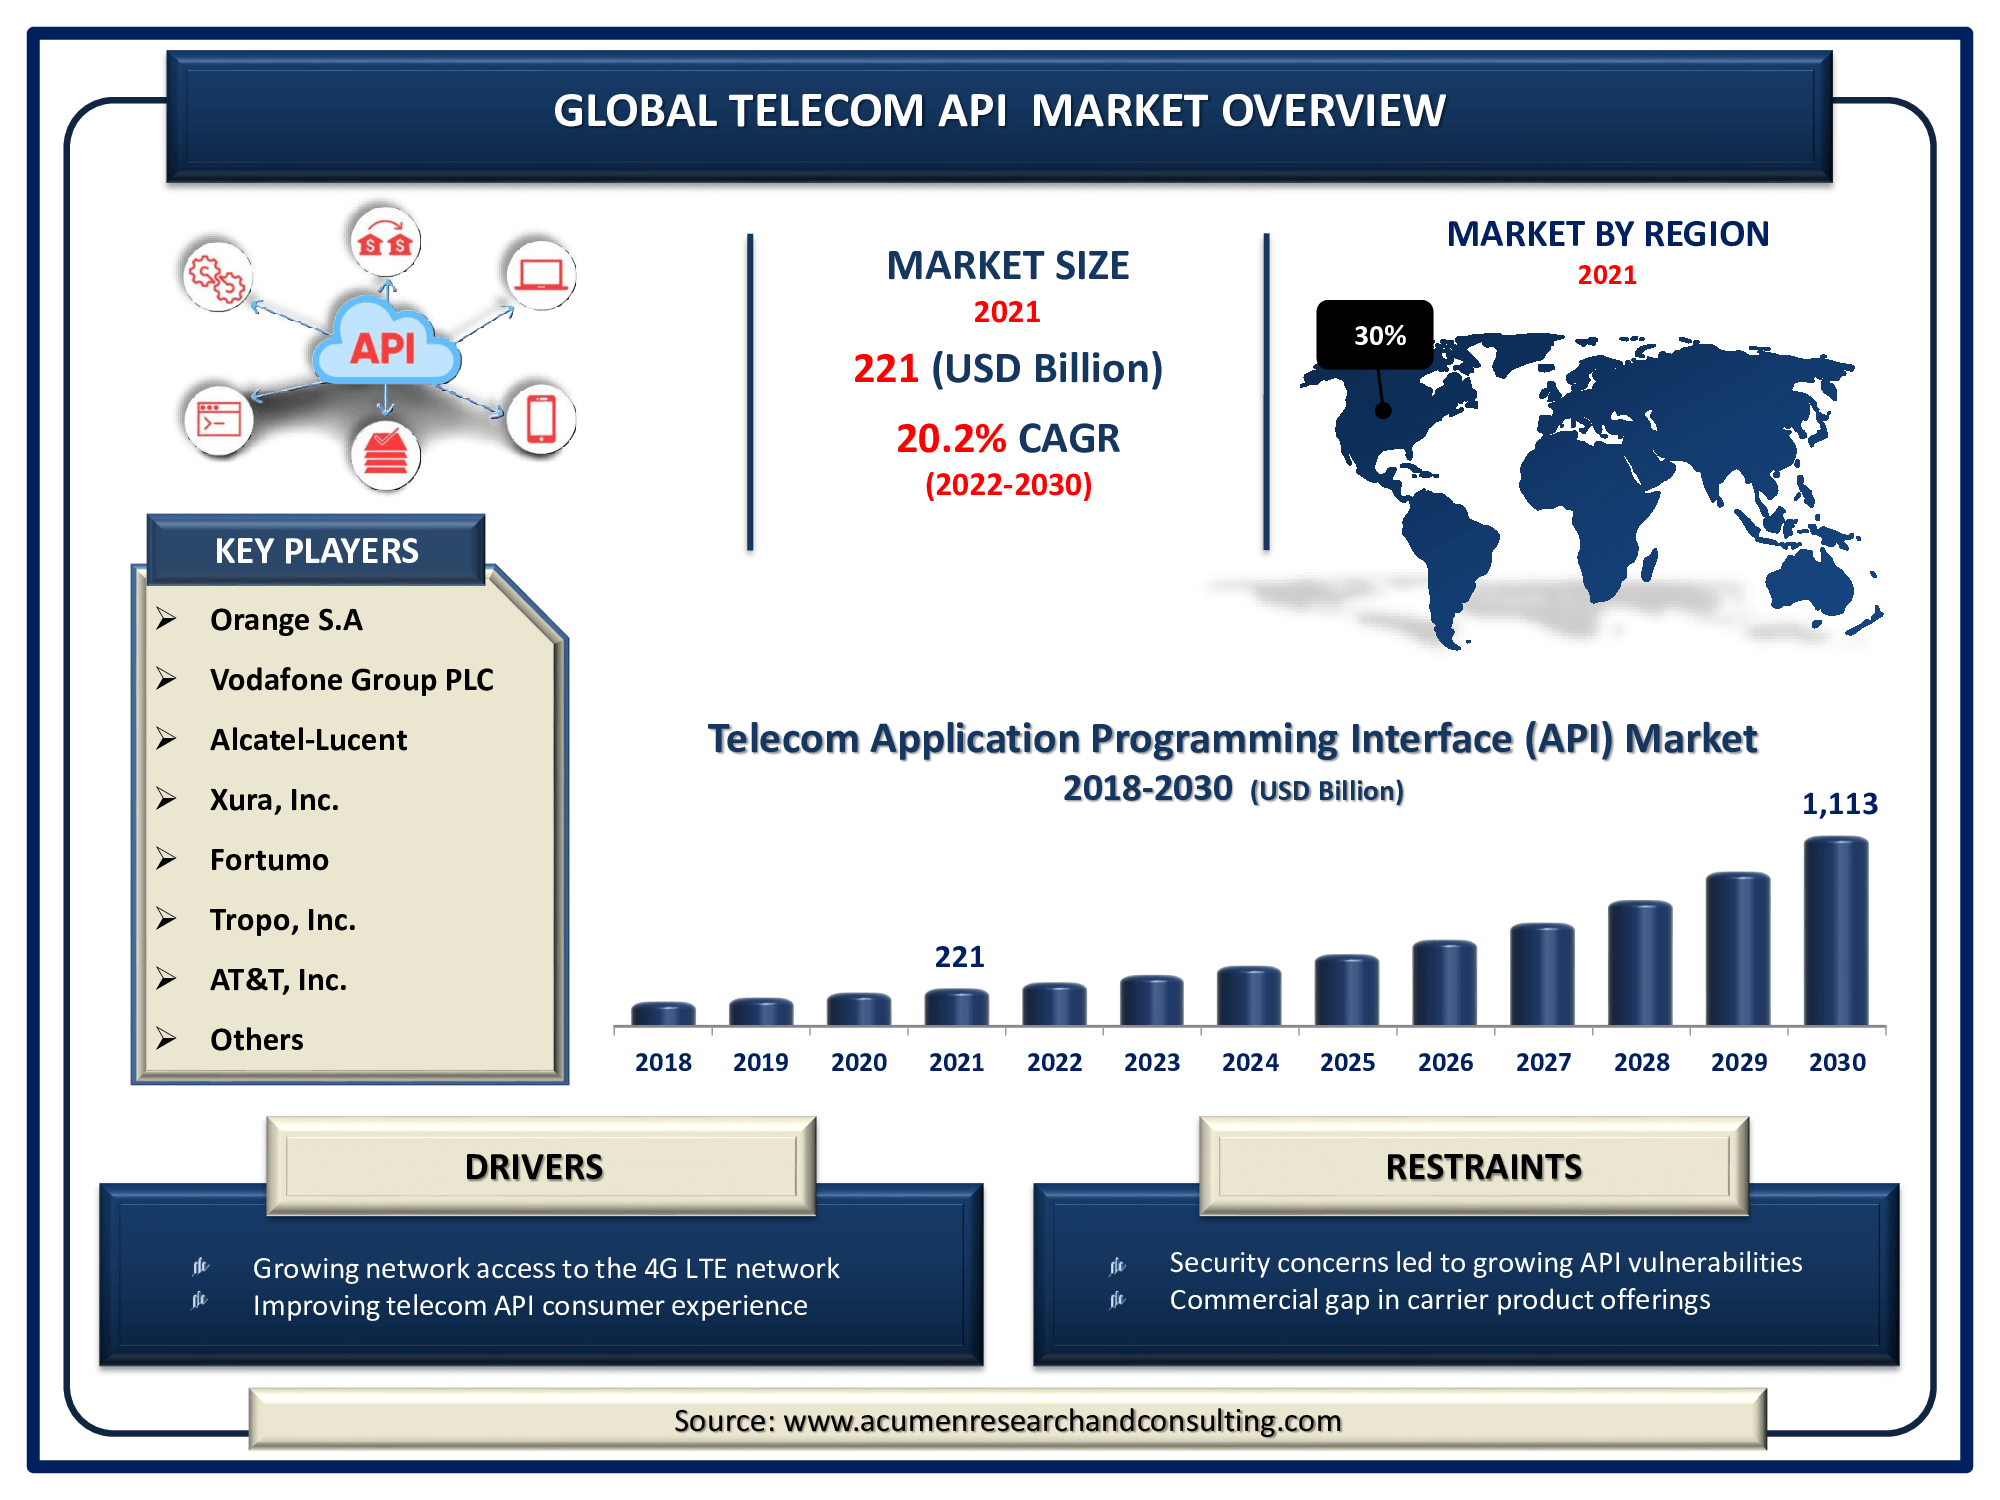 The Global Telecom API Market Size was valued at USD 221 Billion in 2021 and is predicted to be worth USD 1,113 Billion by 2030, with a CAGR of 20.2% from 2022 to 2030.